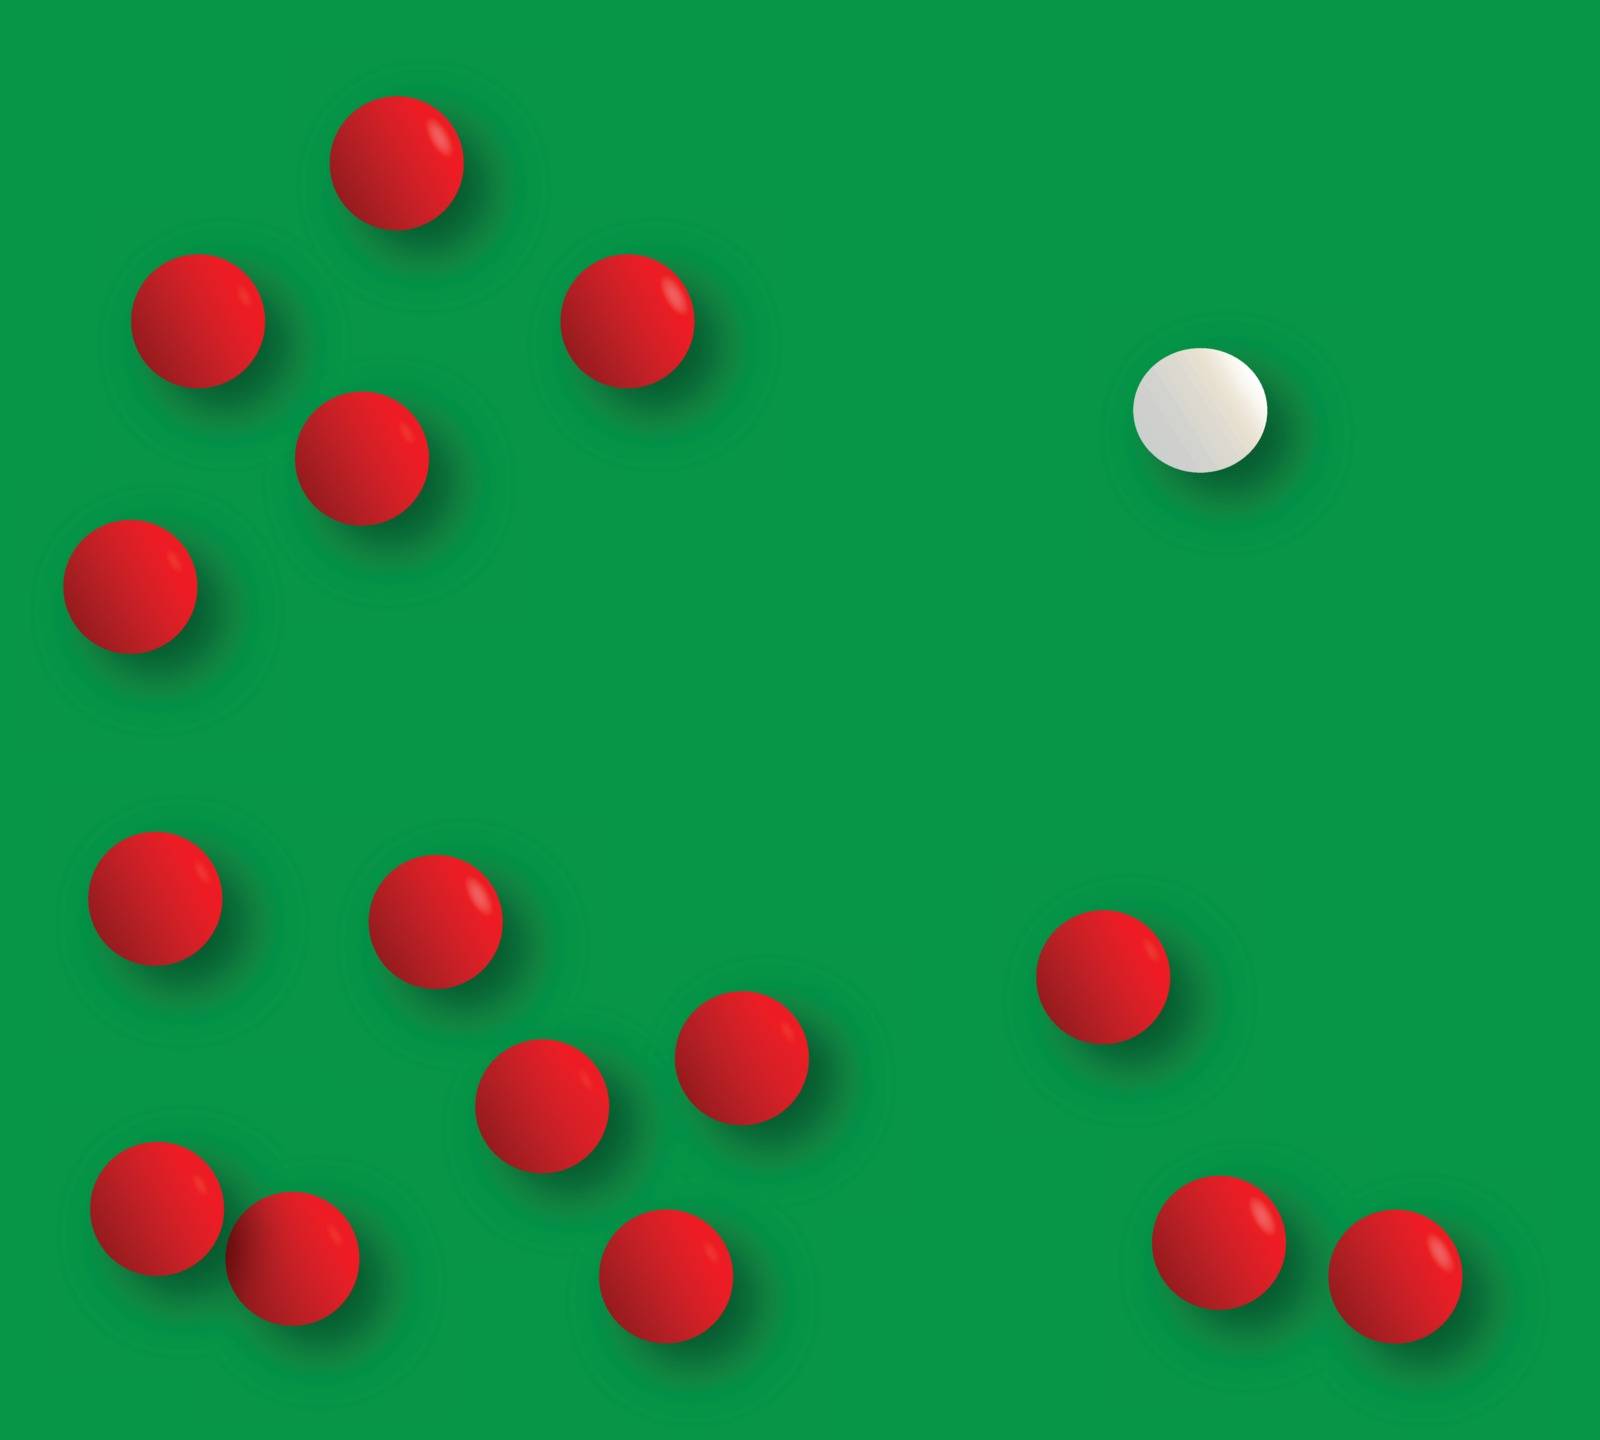 A white billiard ball next to the reds after the break